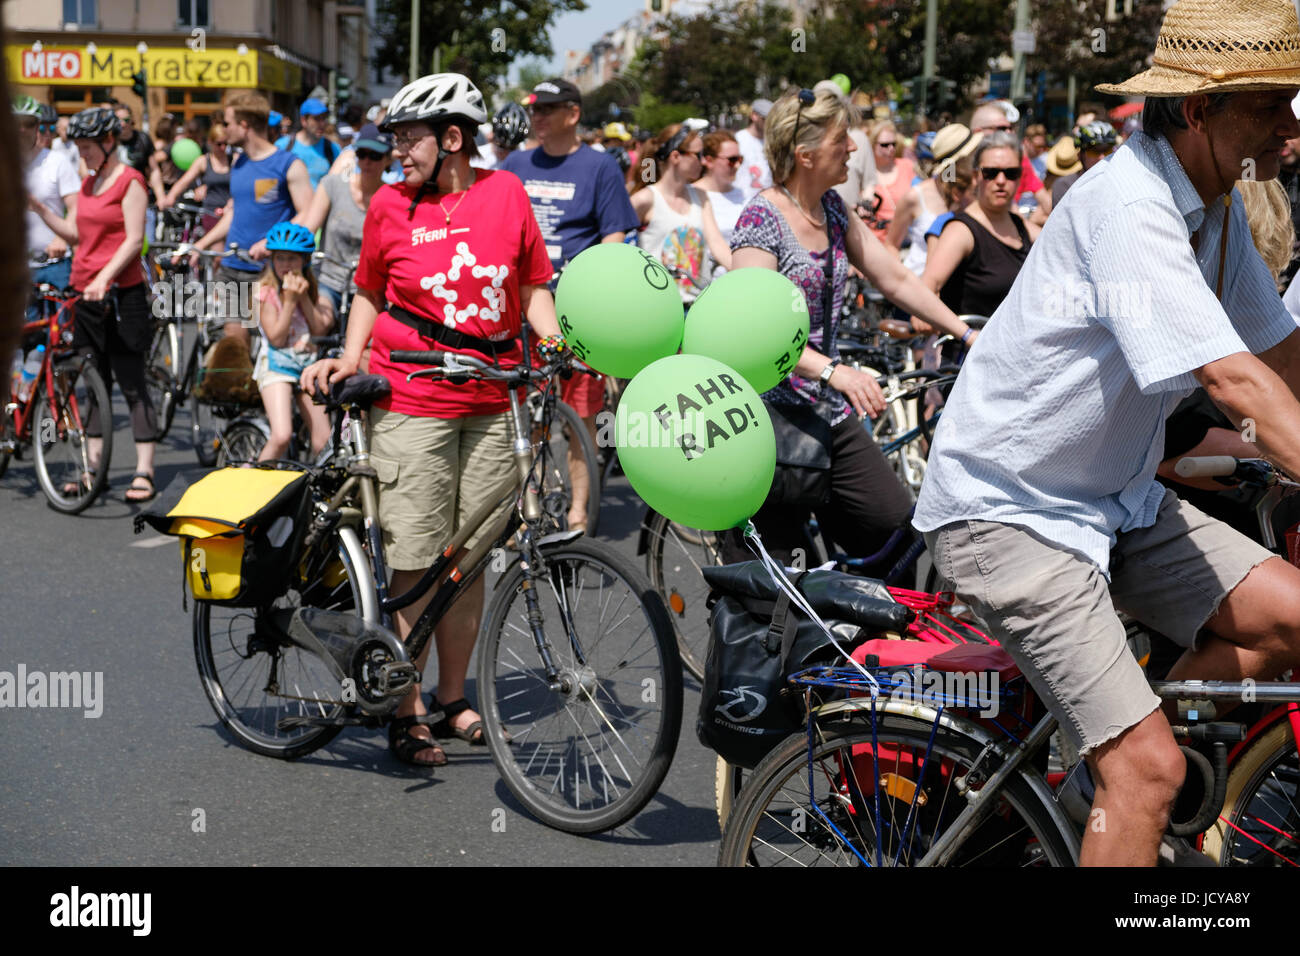 Berlin, Germany - june 11, 217: Many people on bicycles on a bicycle demonstration (Sternfahrt) in Berlin, Germany. Stock Photo